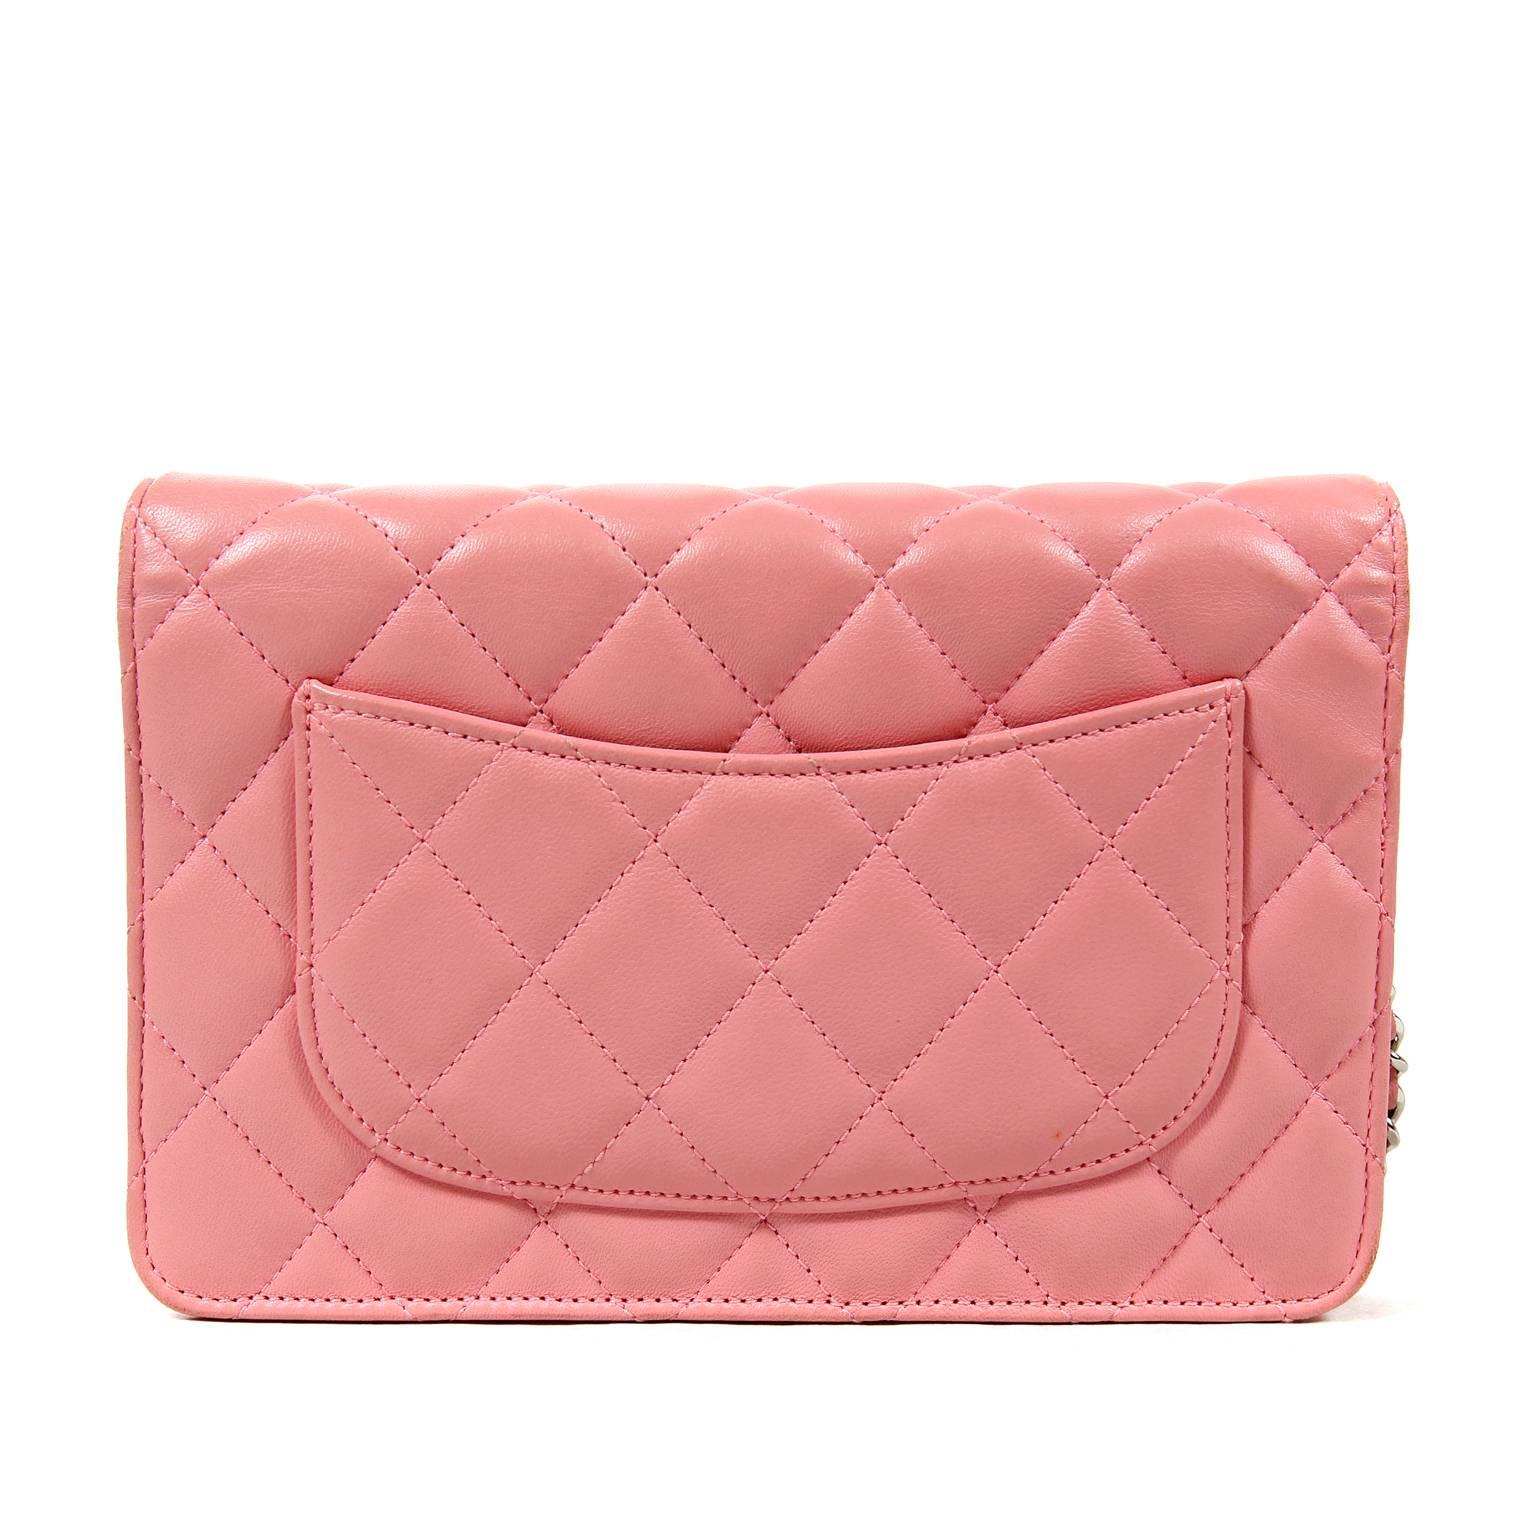 Chanel Pink Leather Wallet on a Chain- Pristine Condition
Thanks to its versatility and understated chic appearance, the WOC is extremely in demand and always fashionable.
Ballerina pink leather is quilted in signature Chanel diamond pattern. 